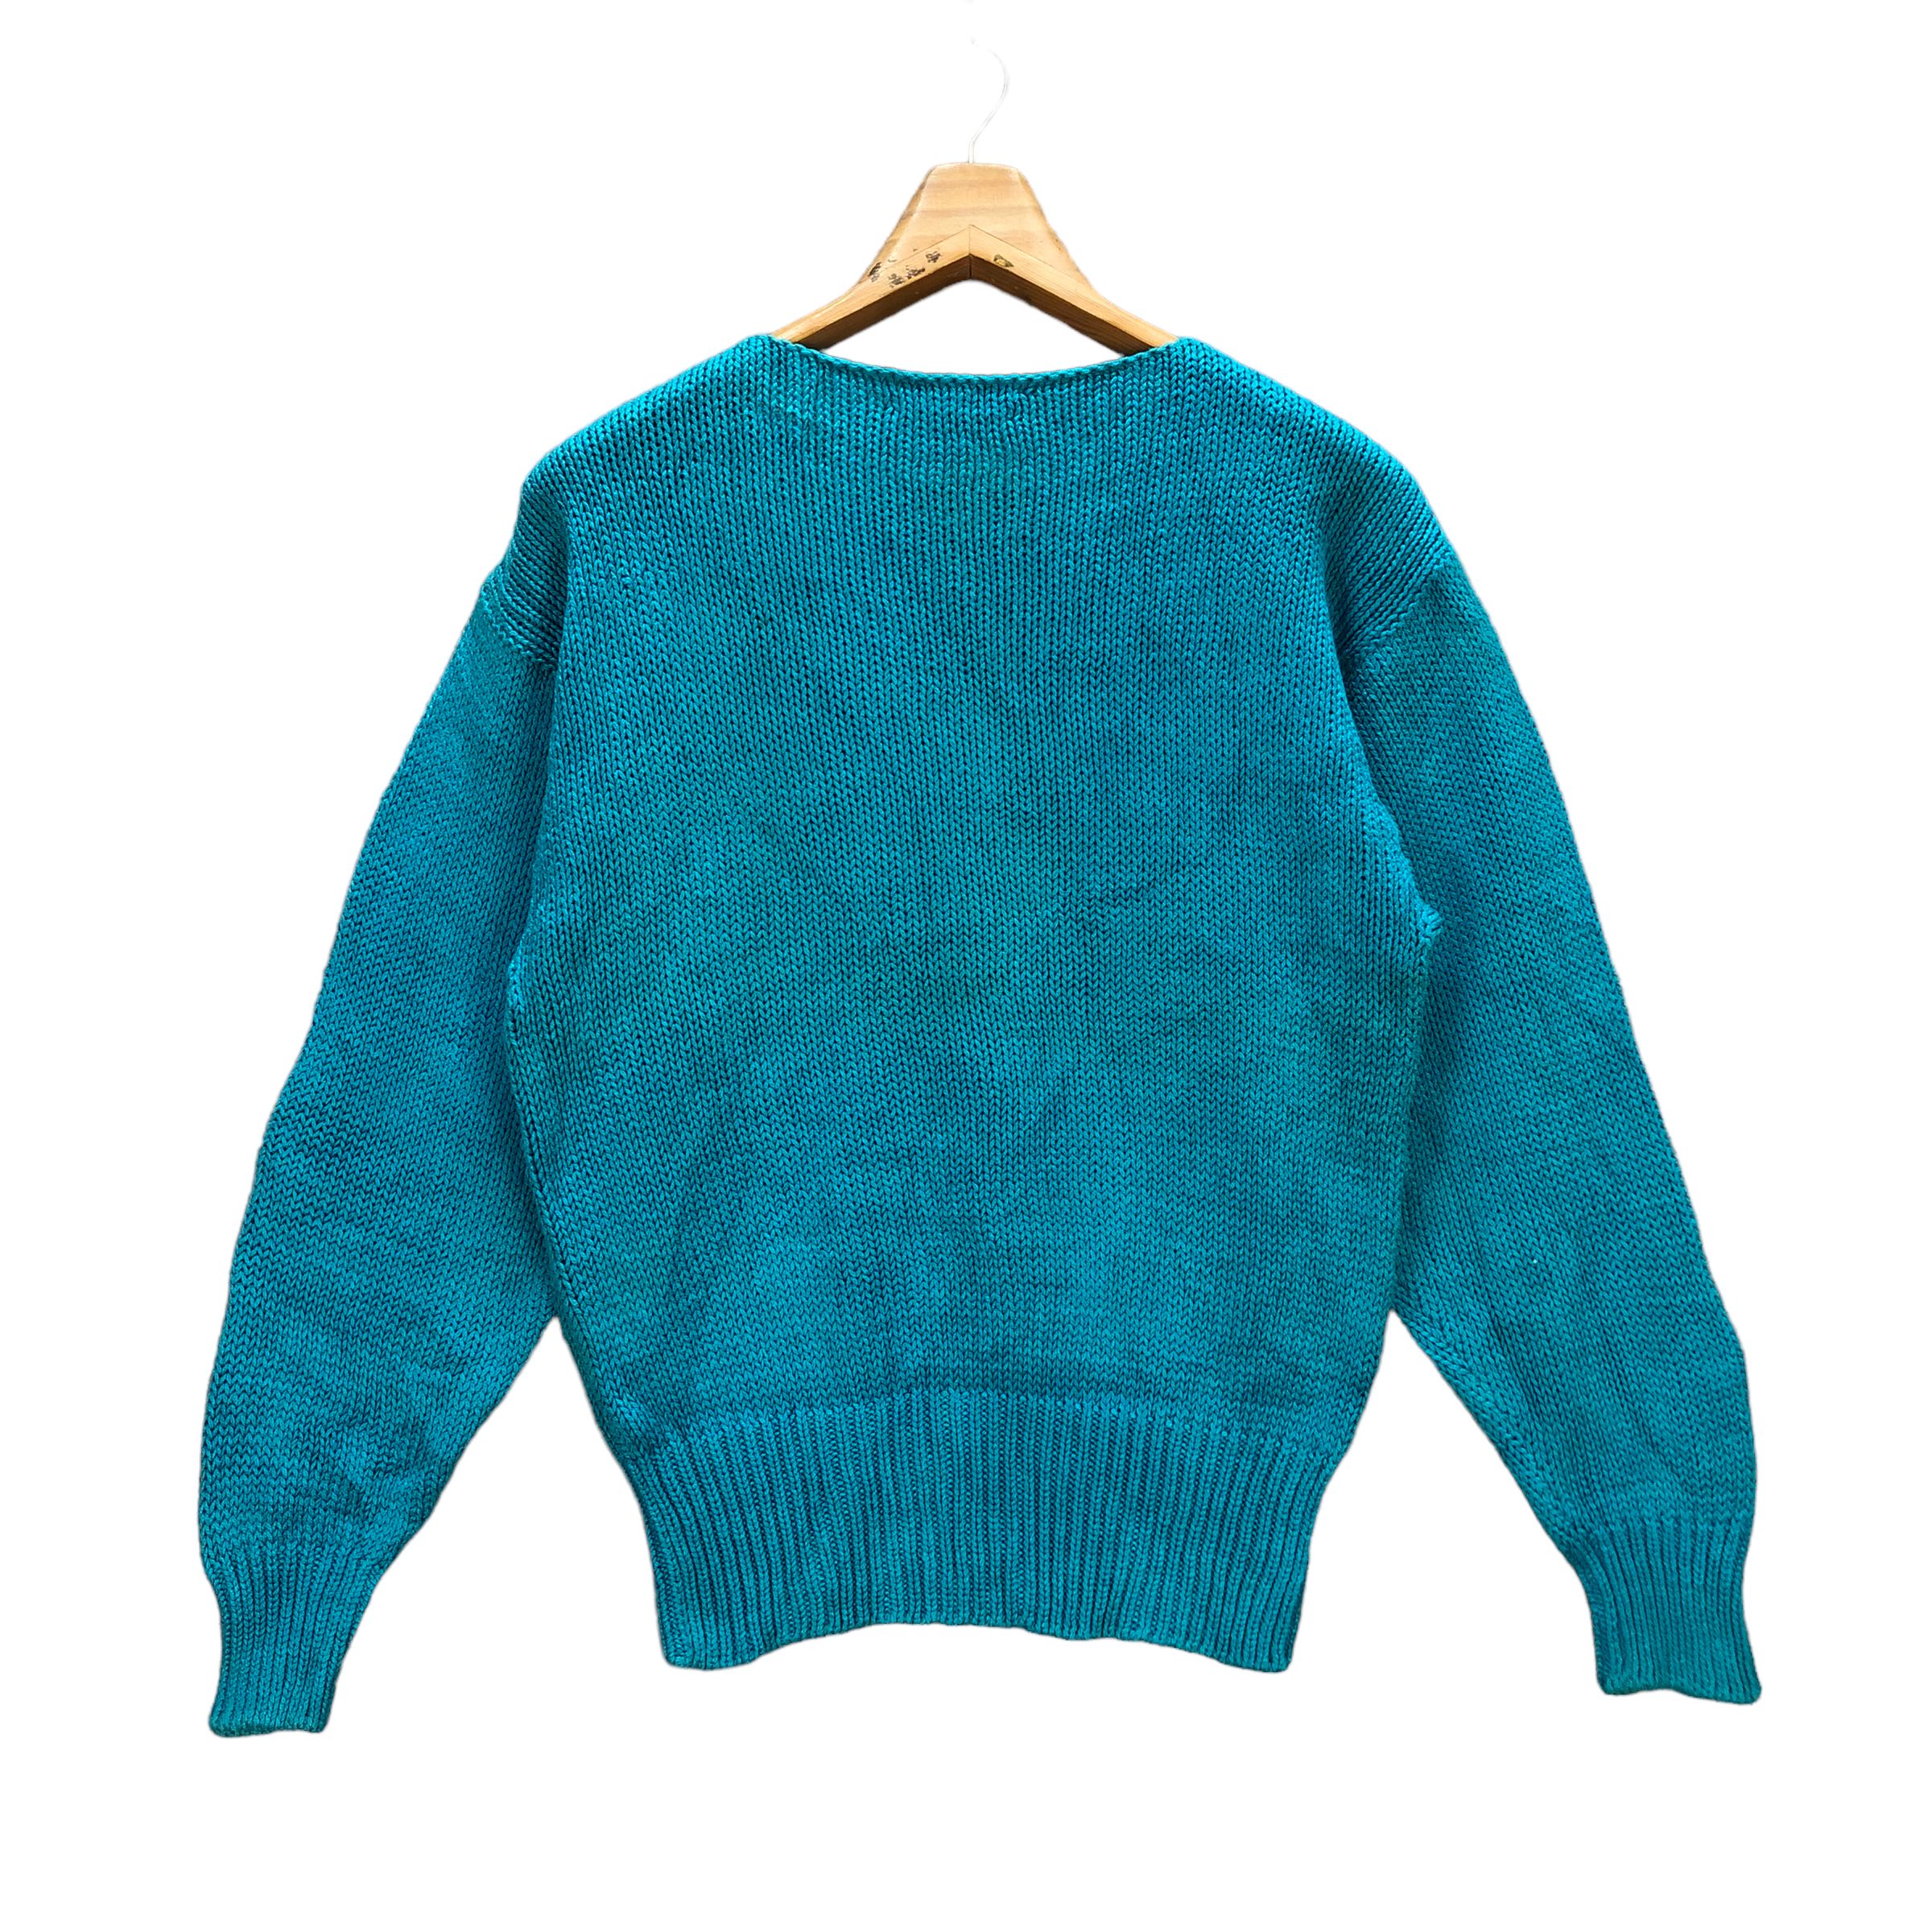 80's GUCCI CABLE KNIT SWEATER #6993-104 - 8